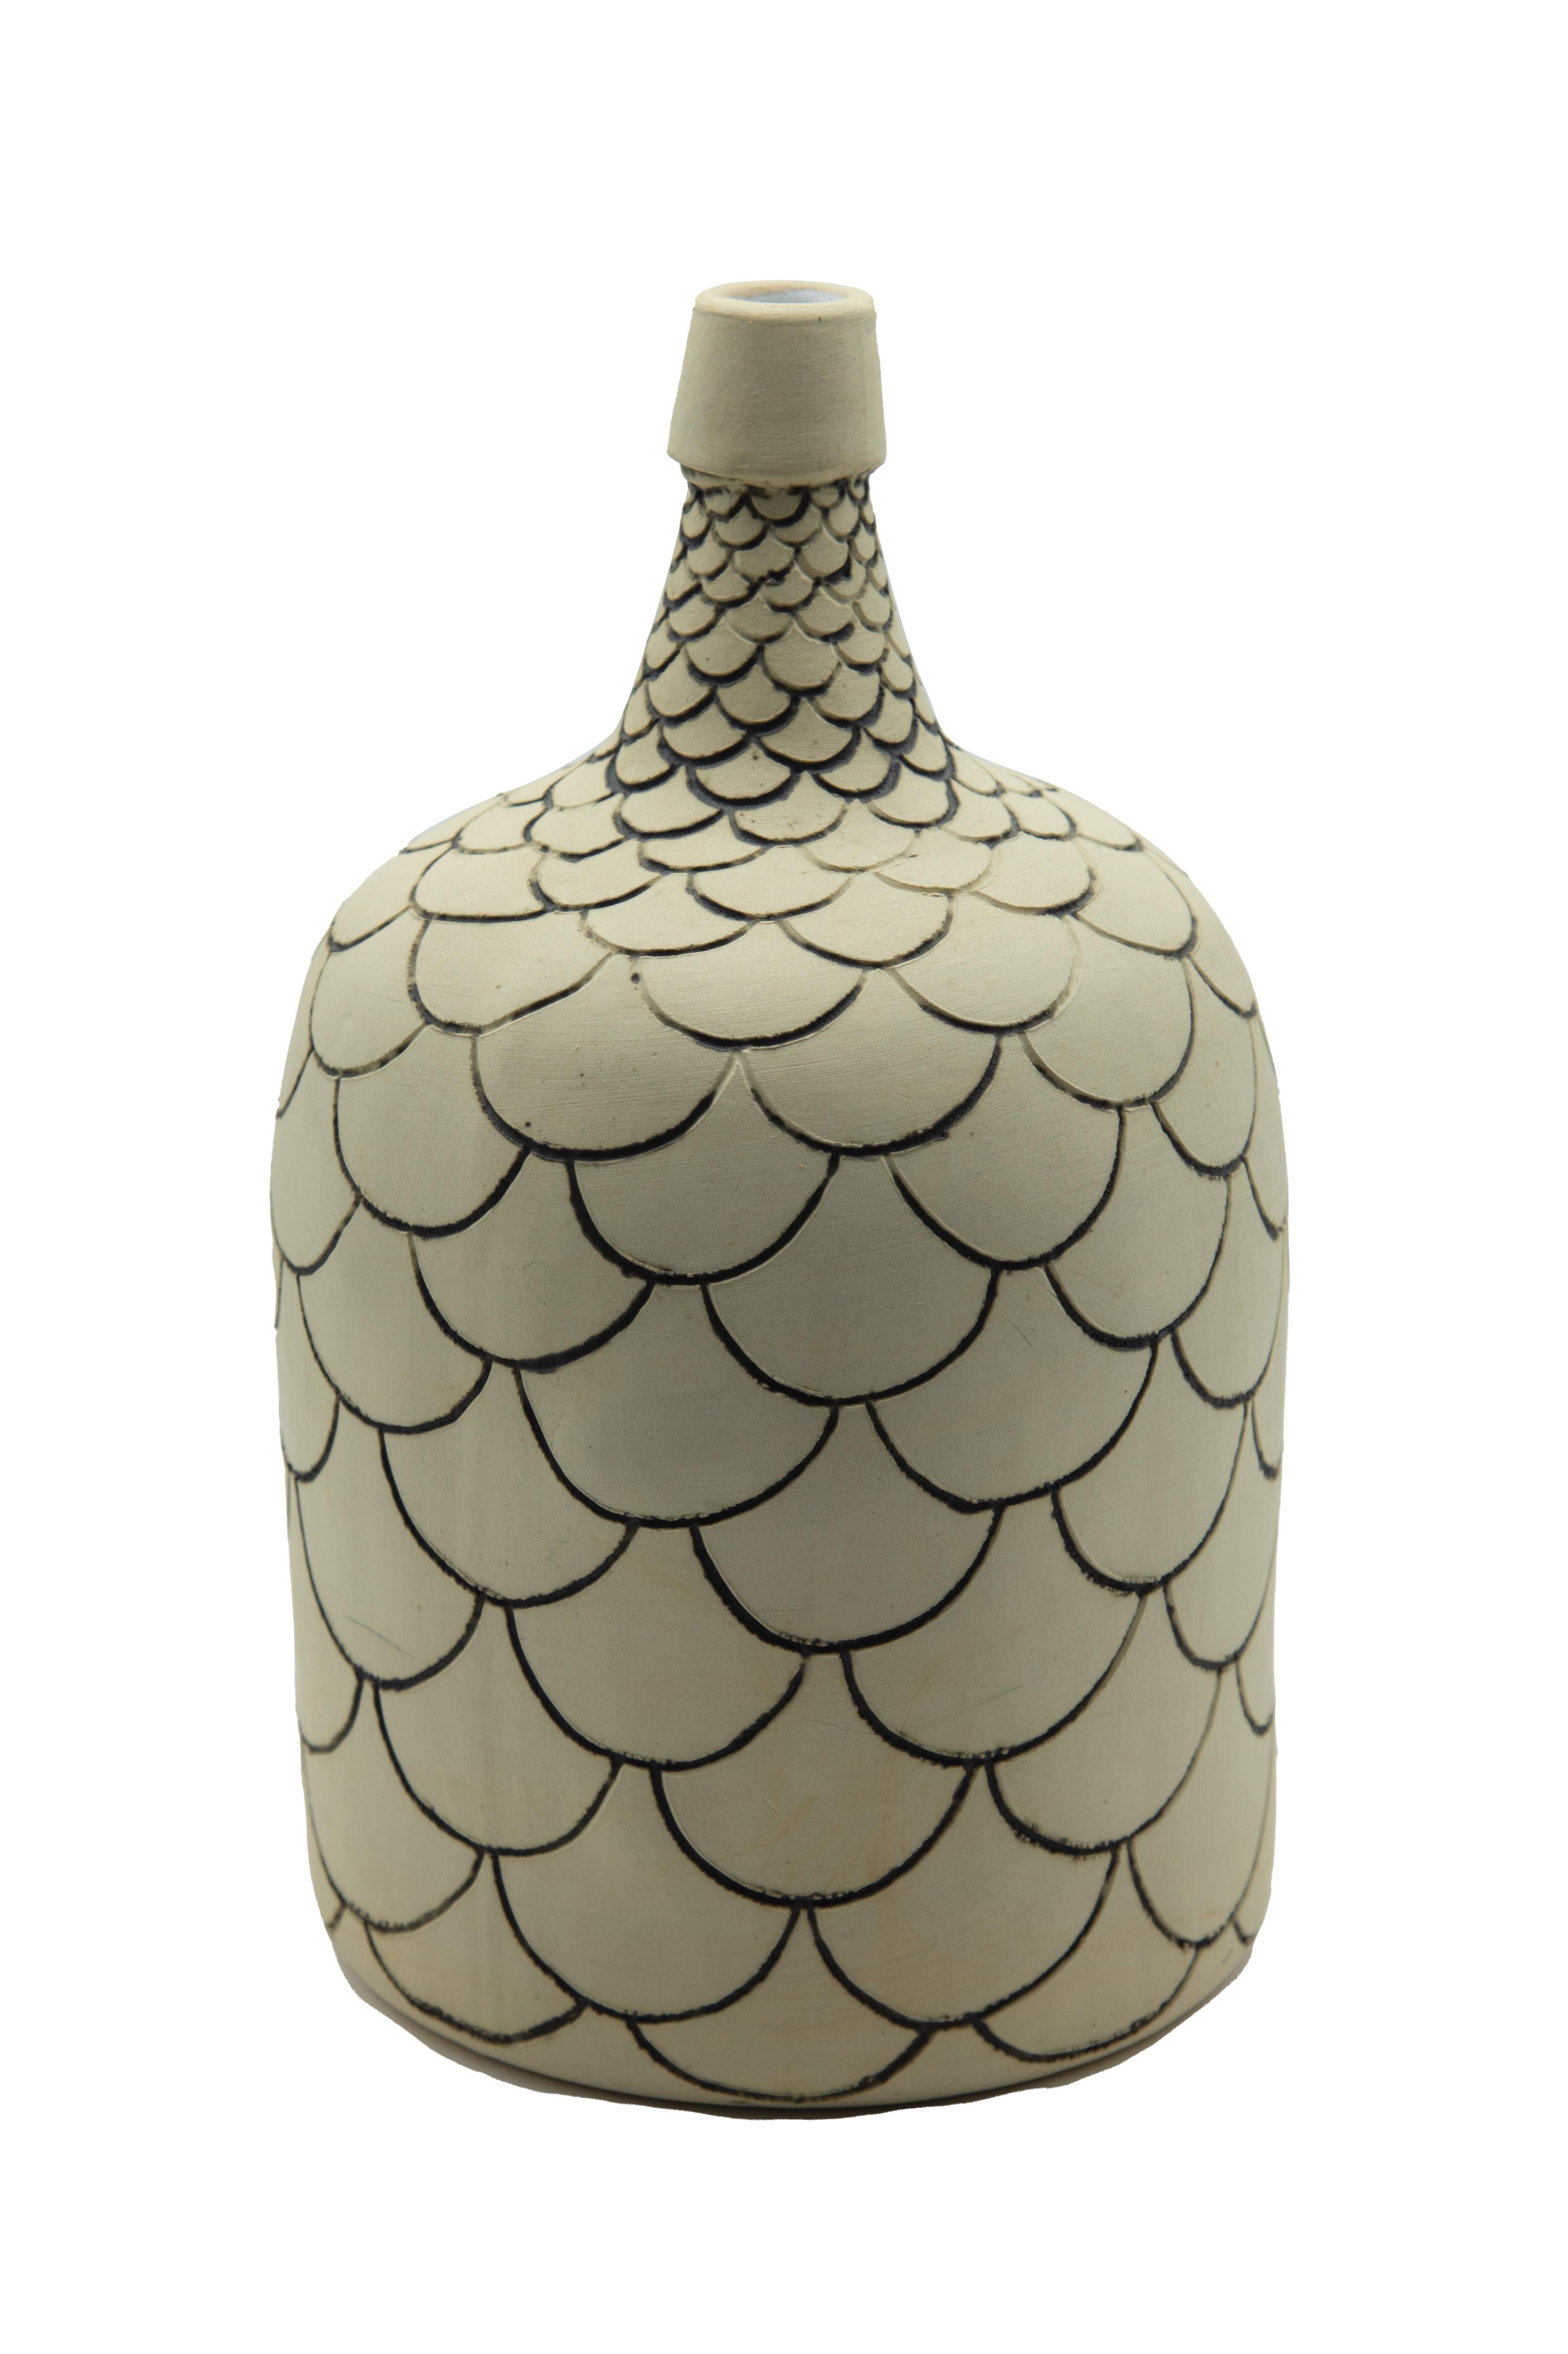 This rustic mezcal bottle is a replica of an antique bottle or demijohn which was used to store mezcal, drunken during folk theaters in Oaxaca, Mexico. The bottle is done with ceramic graffiti sgraffito technique which is later painted with oxide